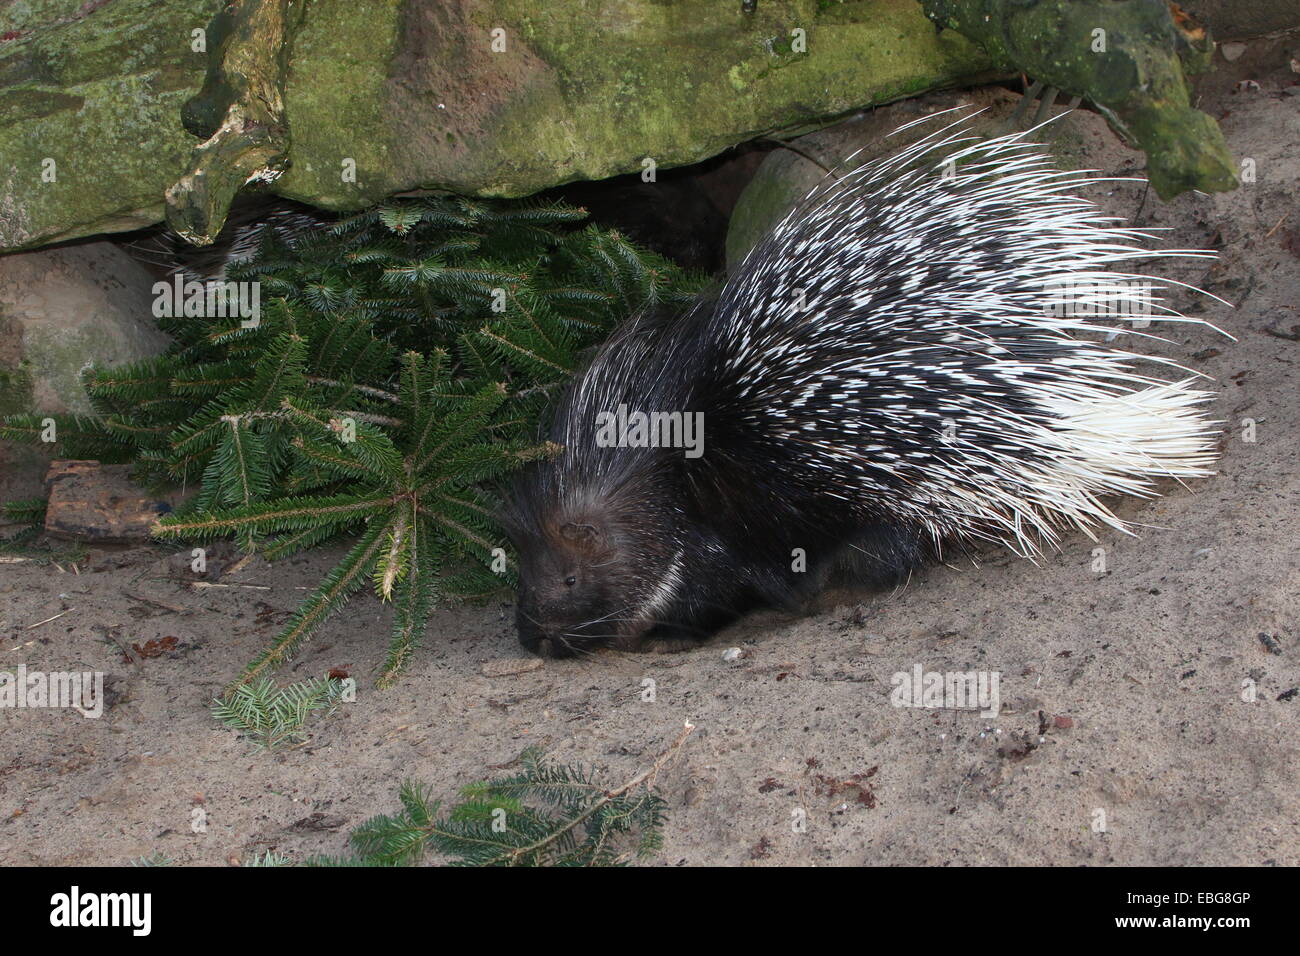 Indian crested porcupine (Hystrix indica) in Christmas setting Stock Photo